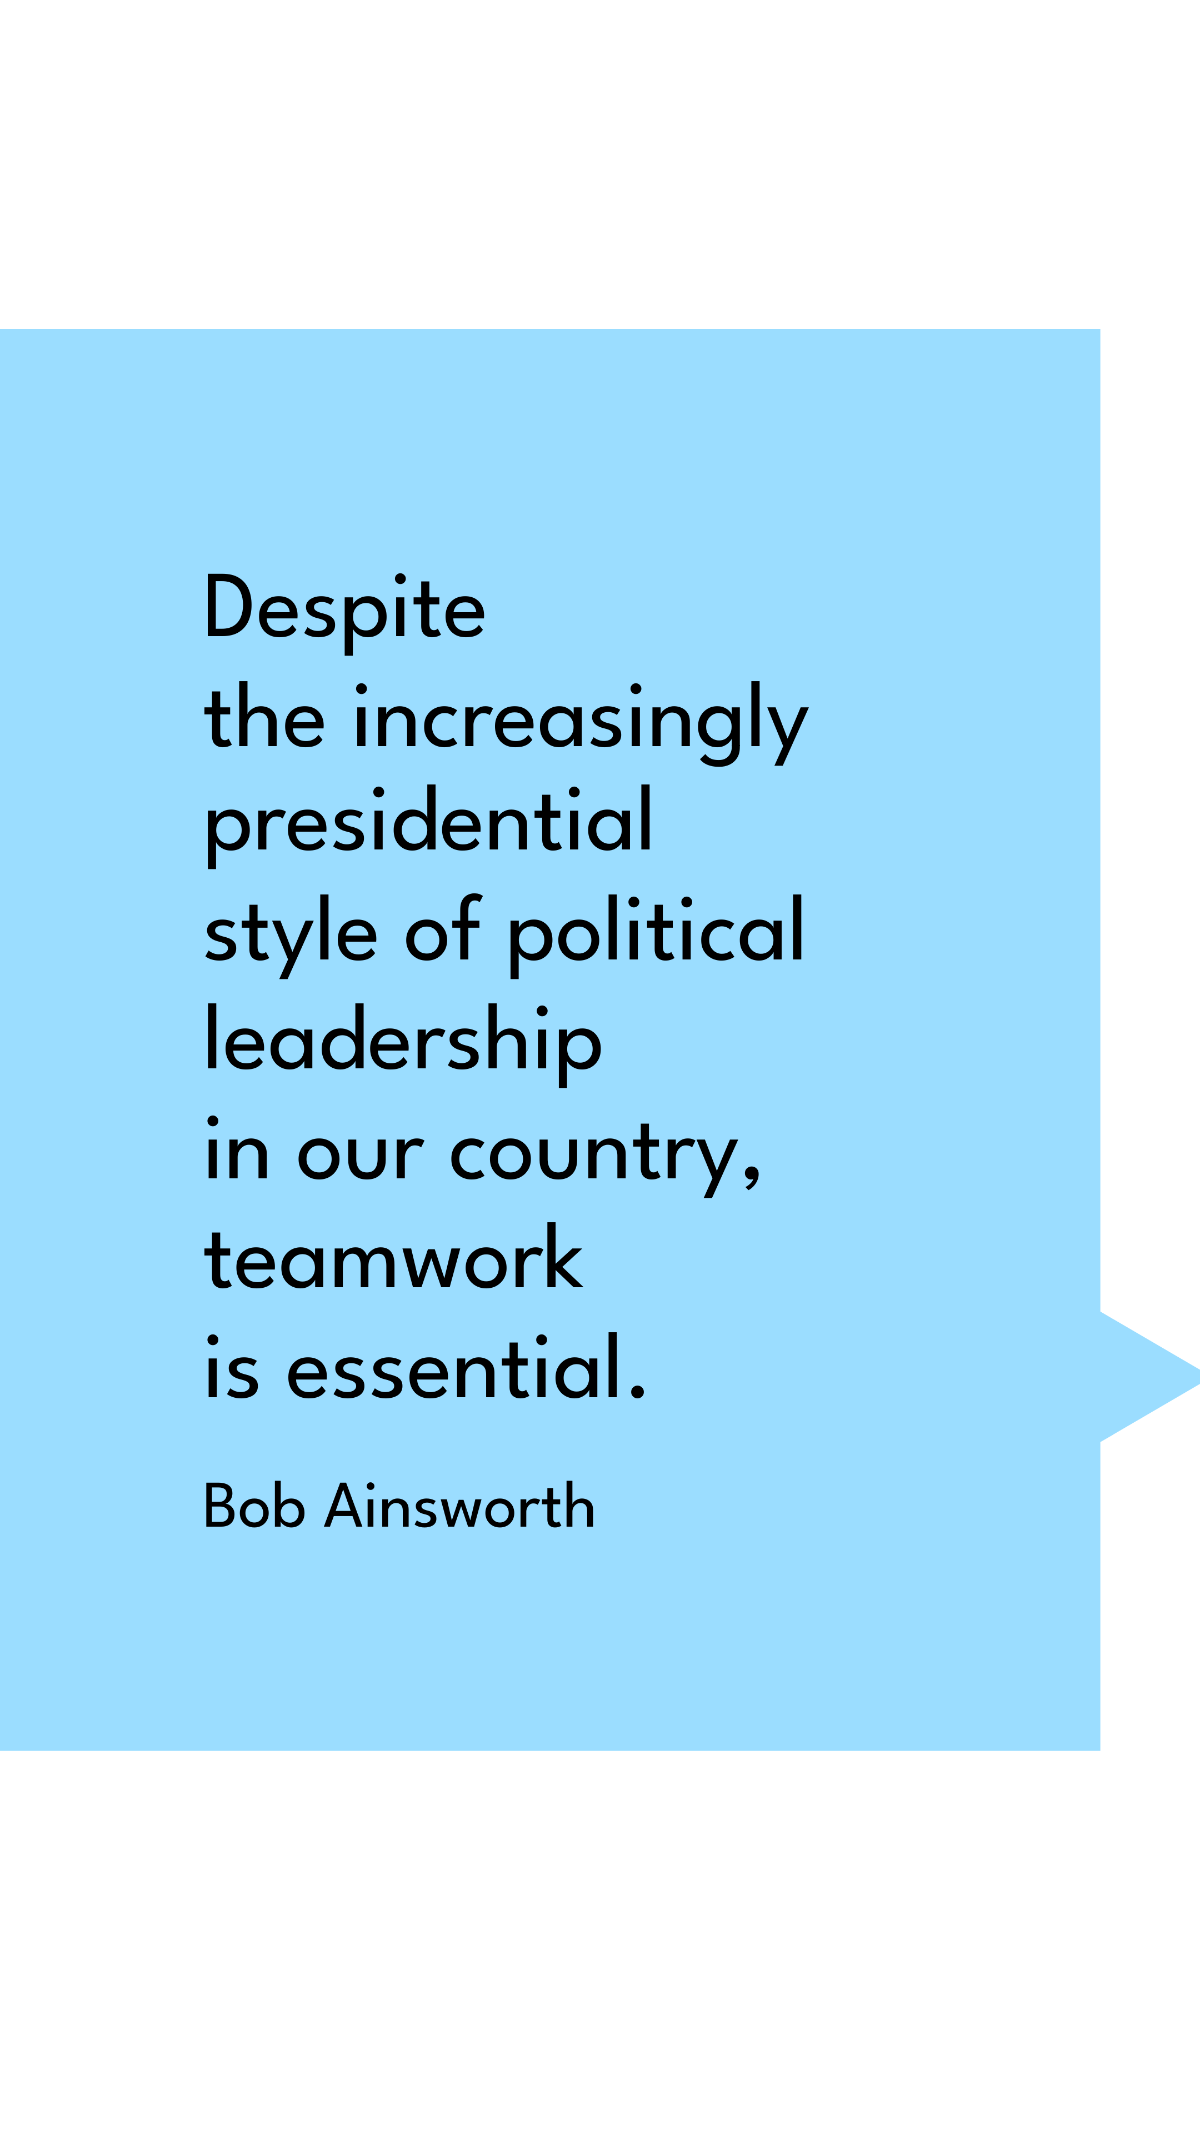 Bob Ainsworth - Despite the increasingly presidential style of political leadership in our country, teamwork is essential. Template